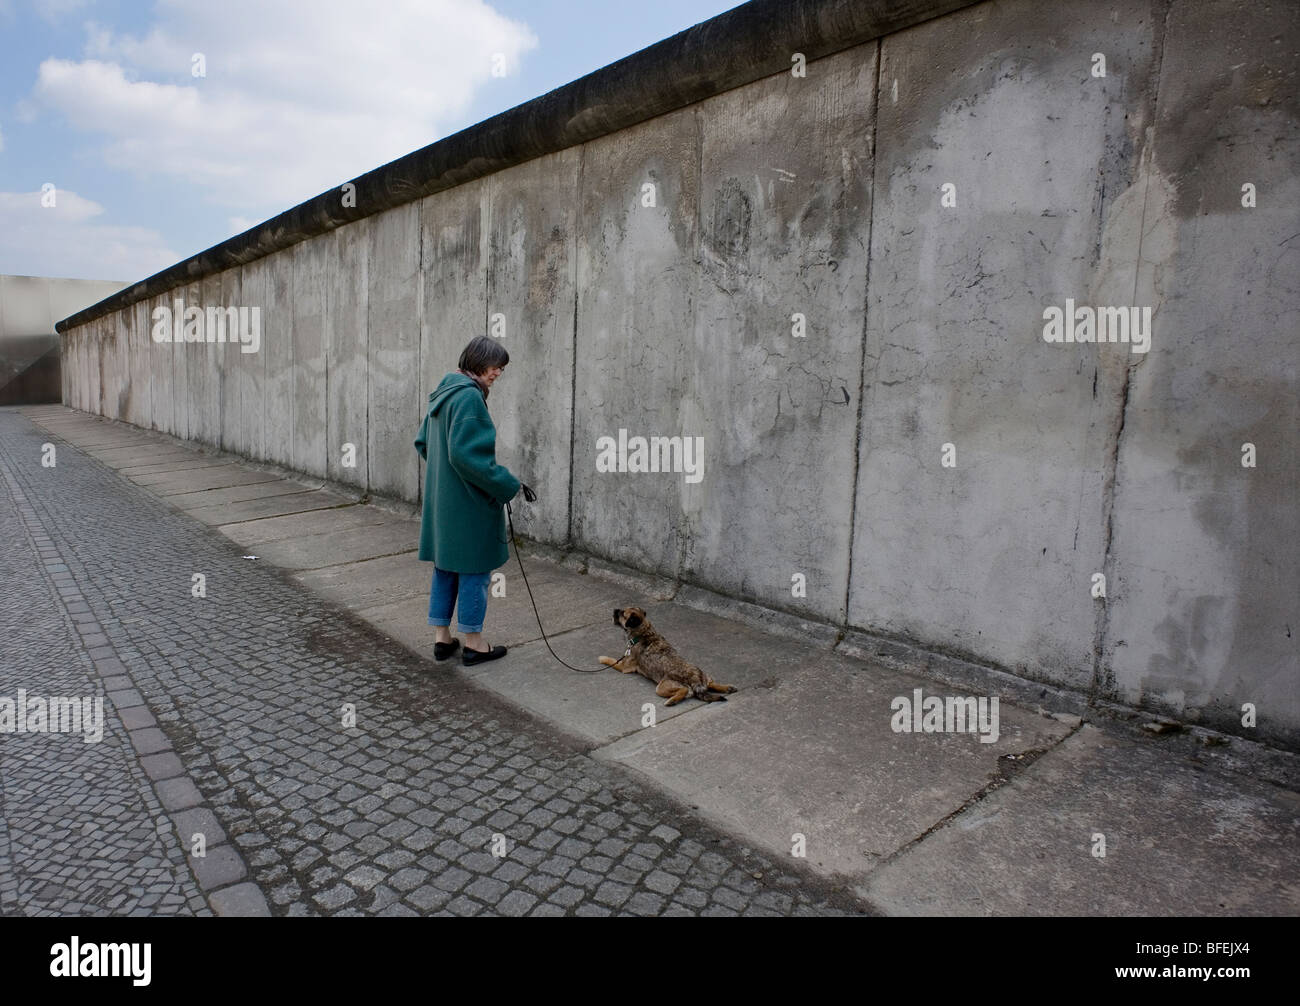 Berlin wall 2009 1989 Germany Unified positive forward history War Cold War end East West Divide city Berlin Wall Maur Stock Photo